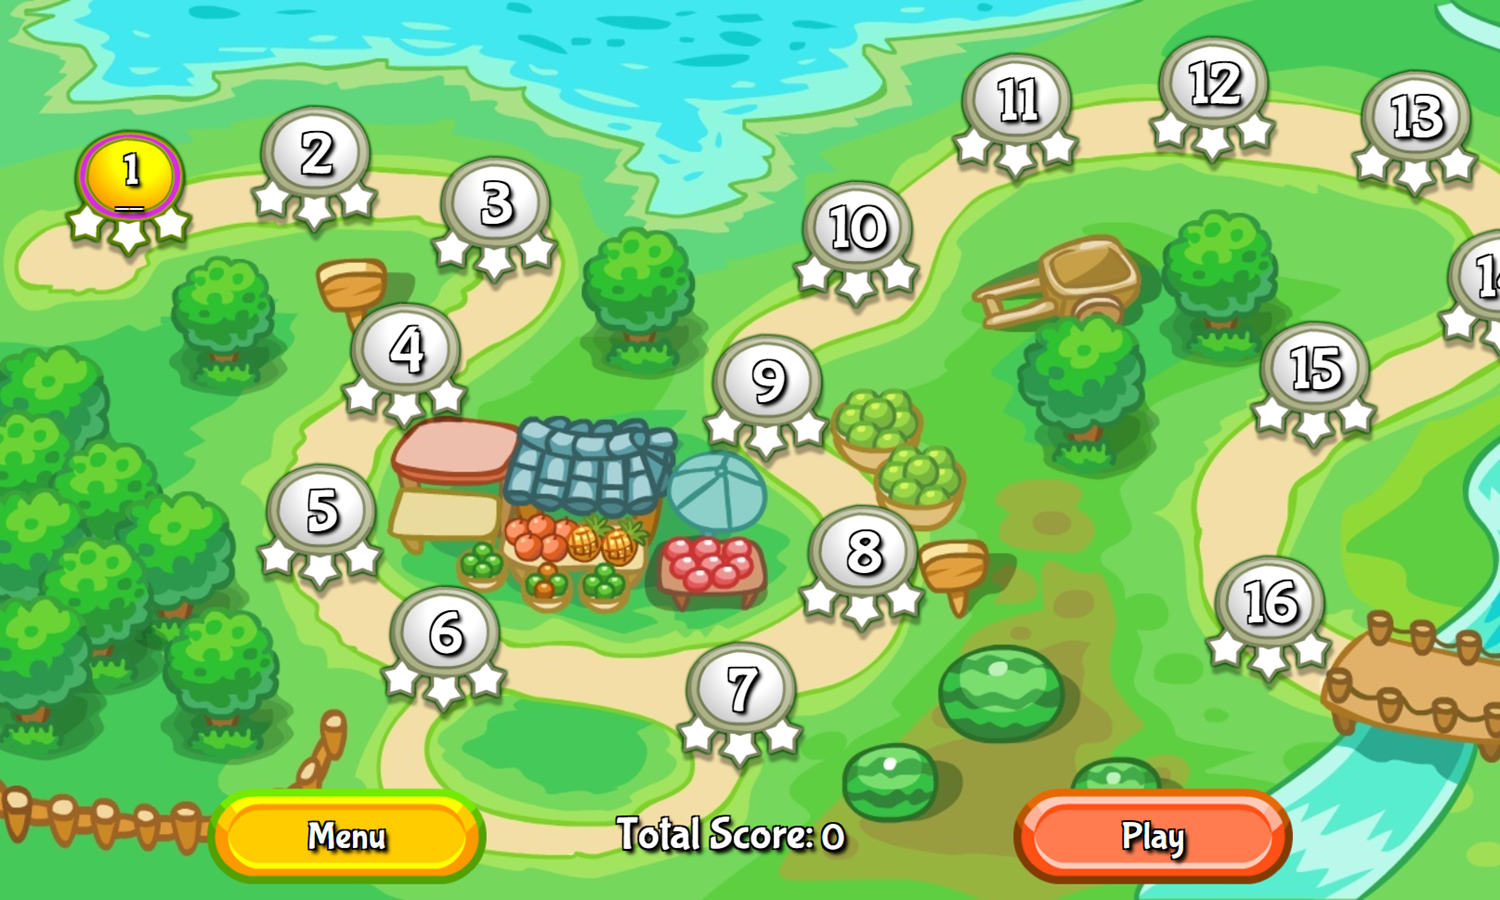 Tri-Fruit Solitaire Game Level Select Screenshot.